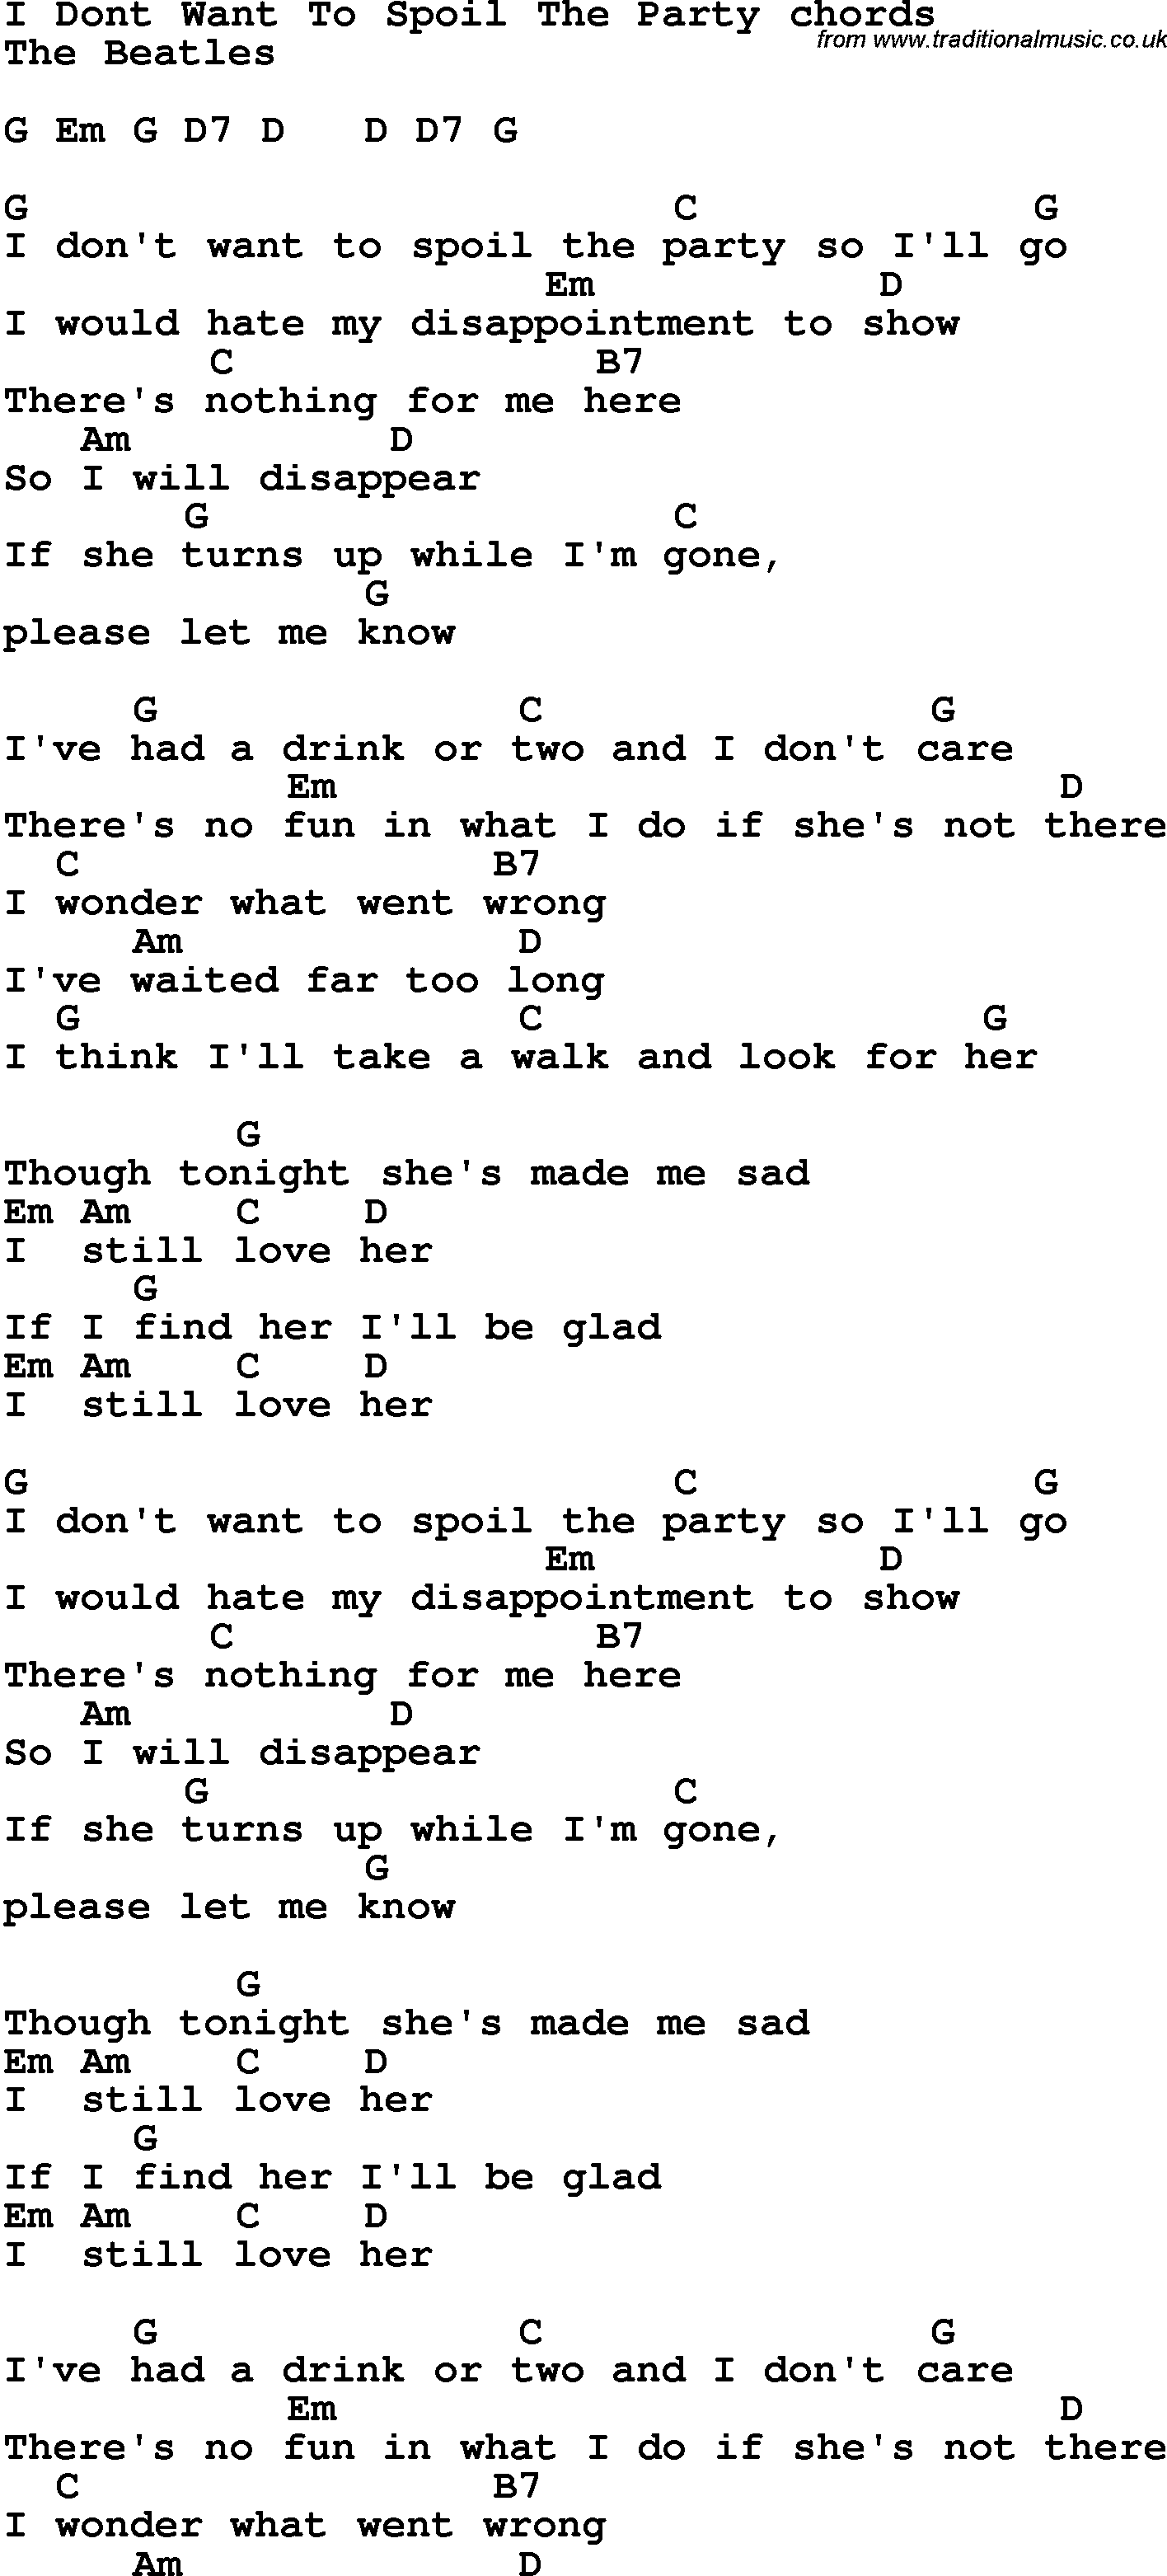 Song Lyrics with guitar chords for I Don't Want To Spoil The Party